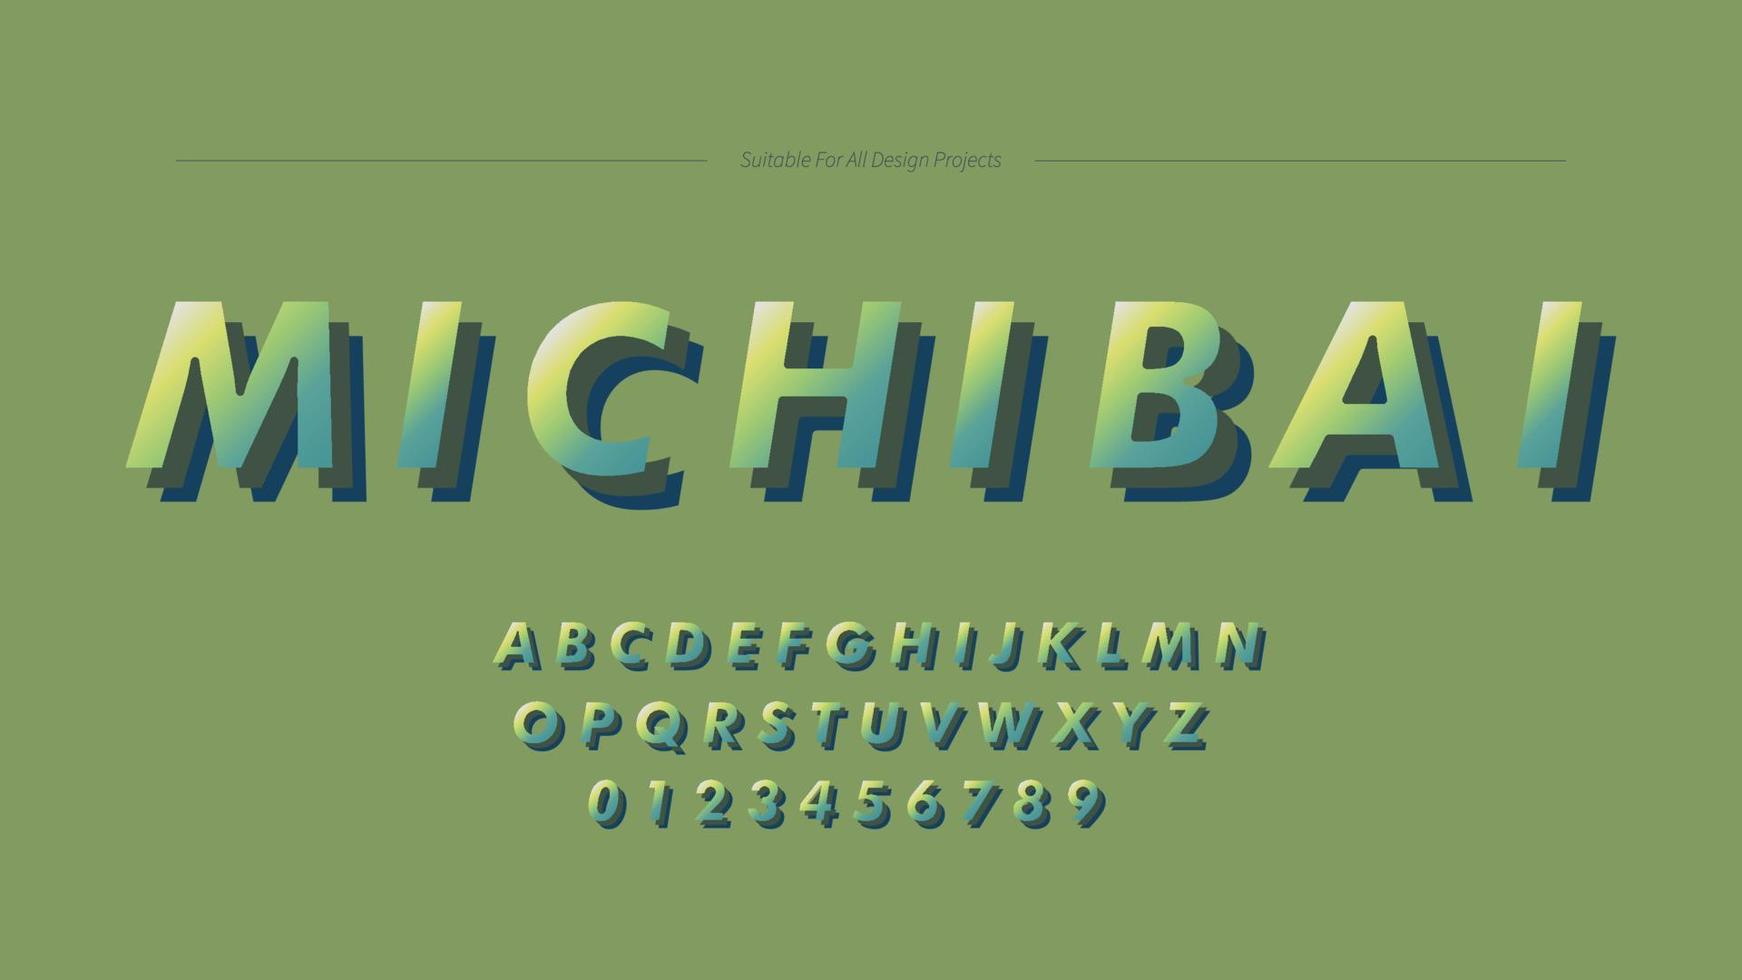 Lime Green Basic Abstract Gradient Text Effect Font. Cute Pastel Style Alphabet Letters vector